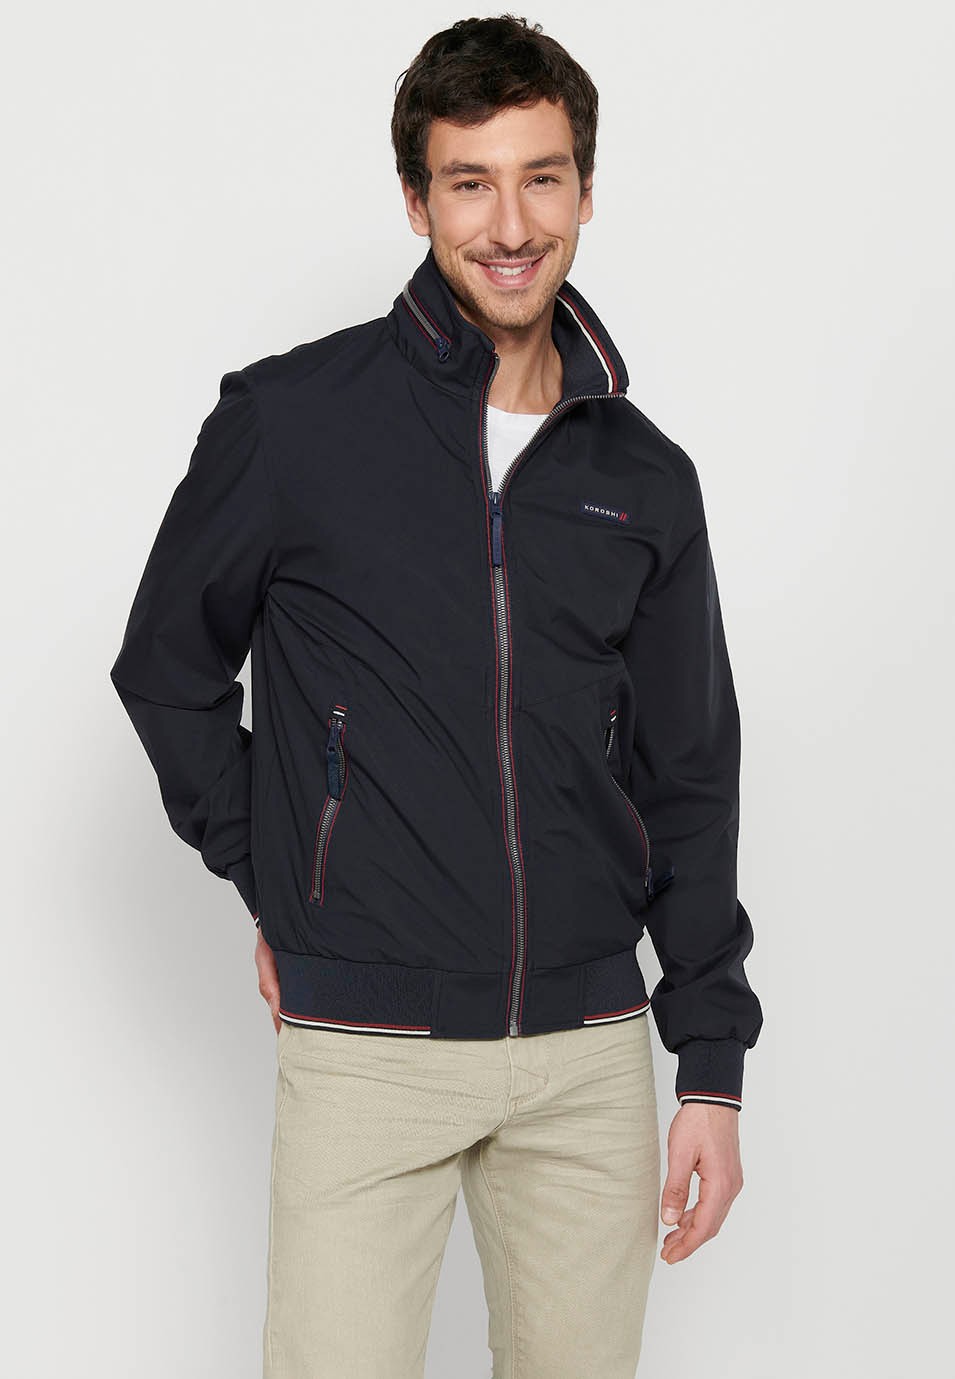 Long-sleeved high-neck jacket with front zipper closure and ribbed finishes with pockets, one inside in Navy for Men